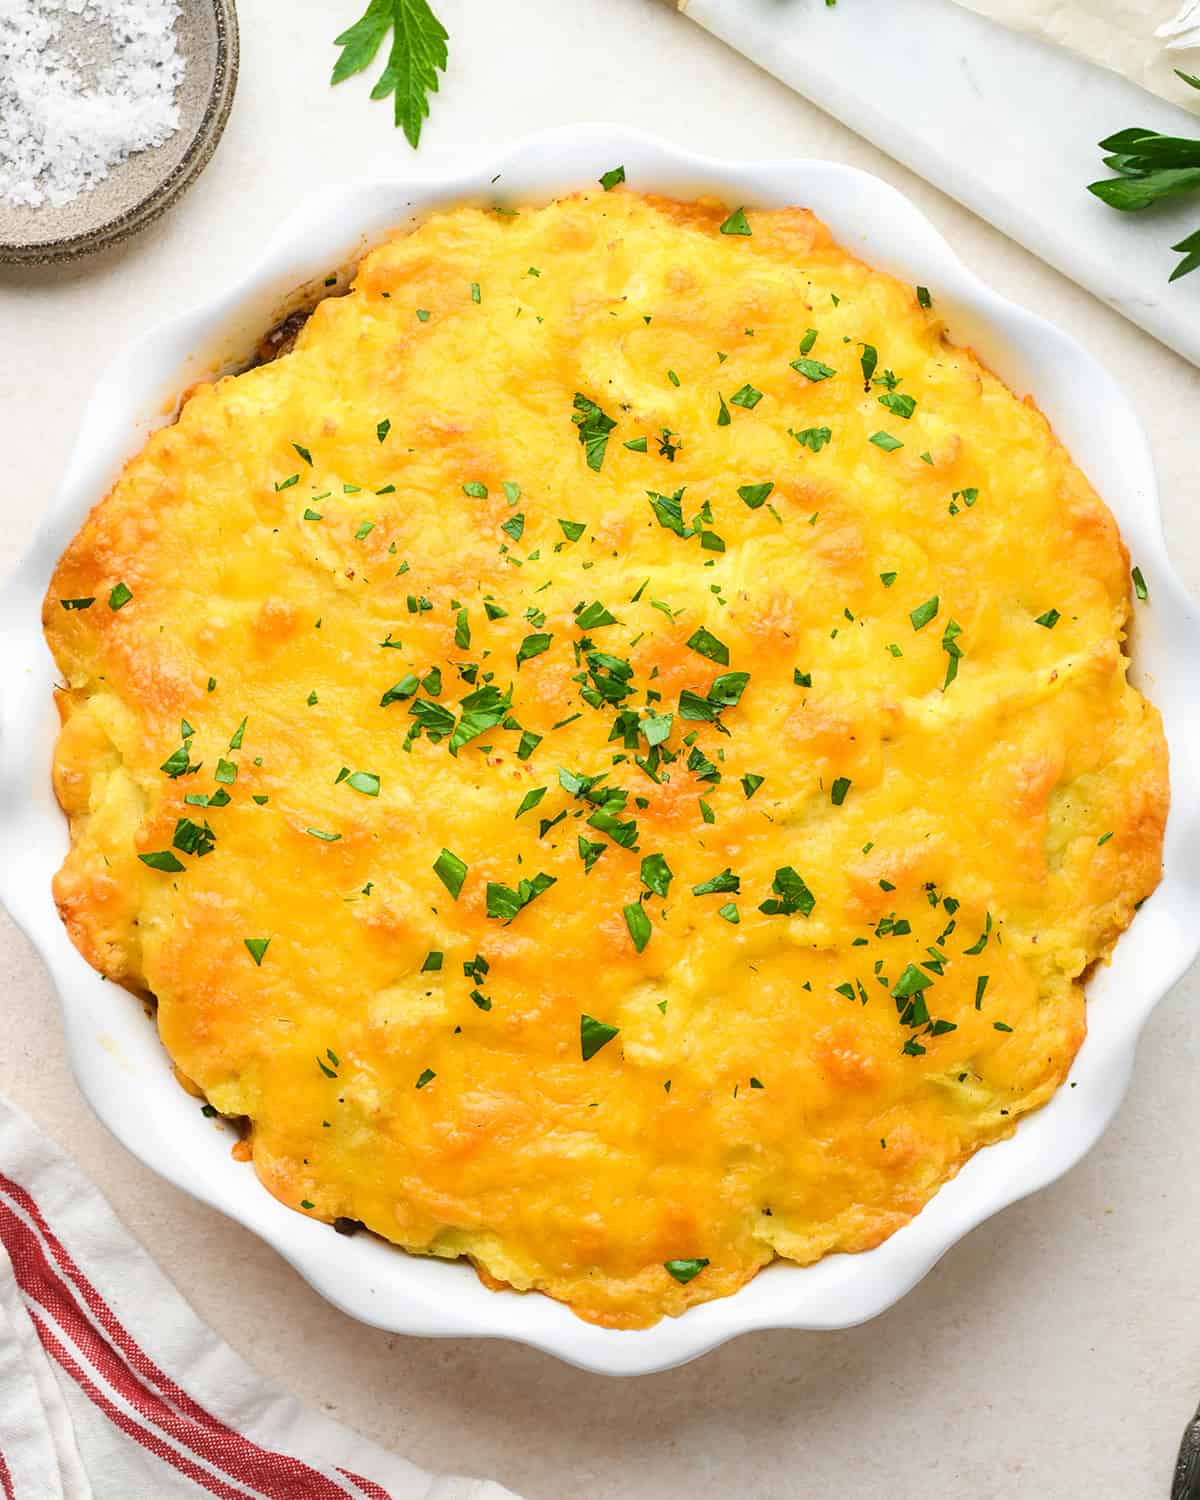 Shepherd's Pie Recipe in a pie dish after baking, garnished with parsley